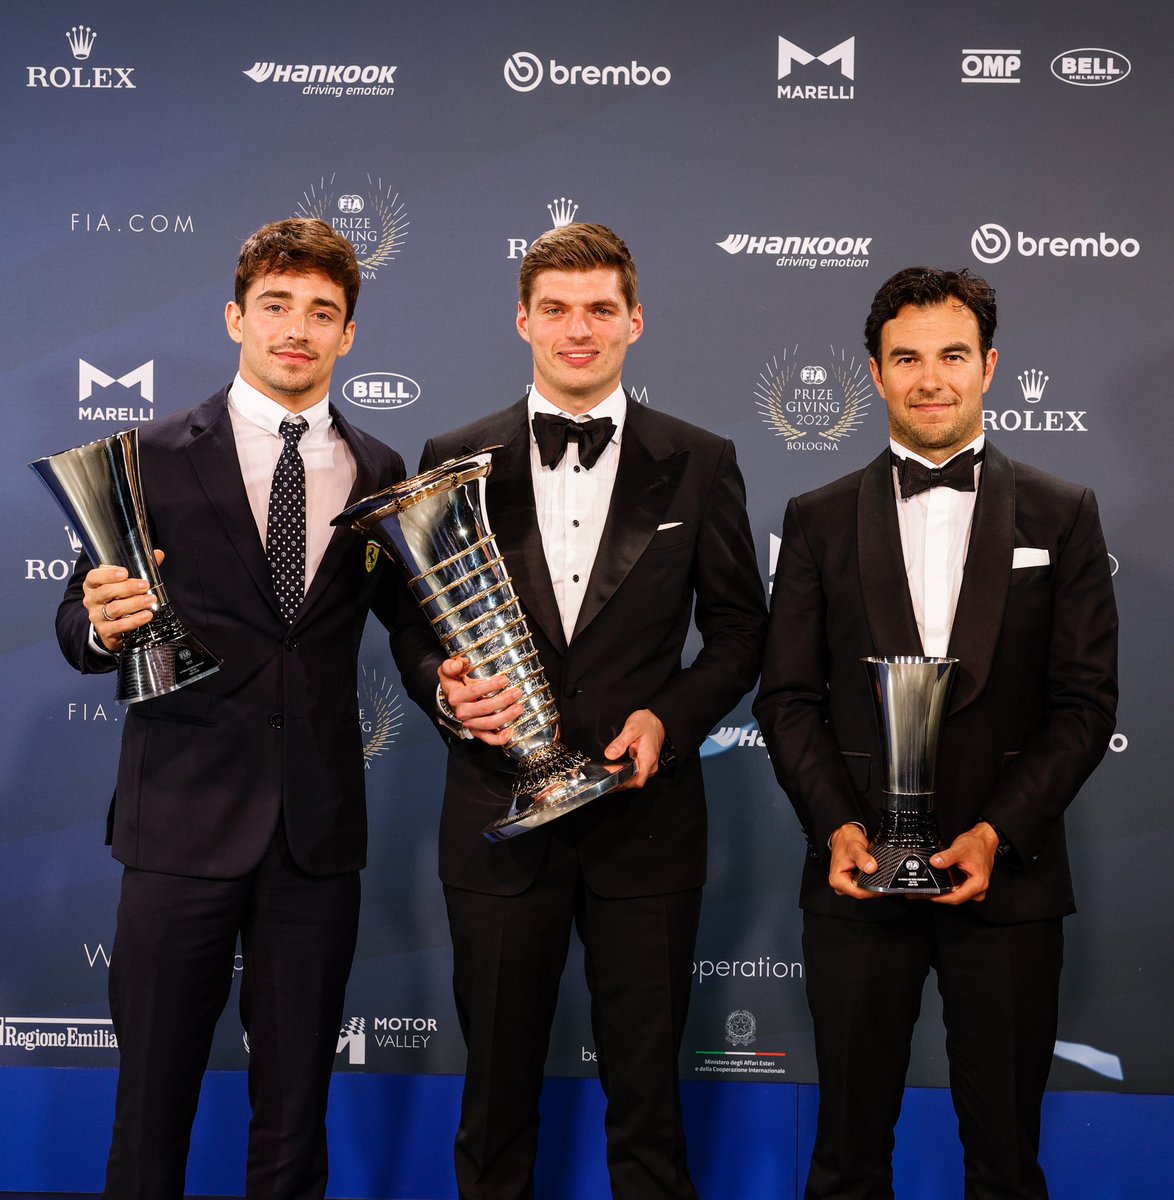 Charles, Max and Checo group photo

#FIAPrizeGiving